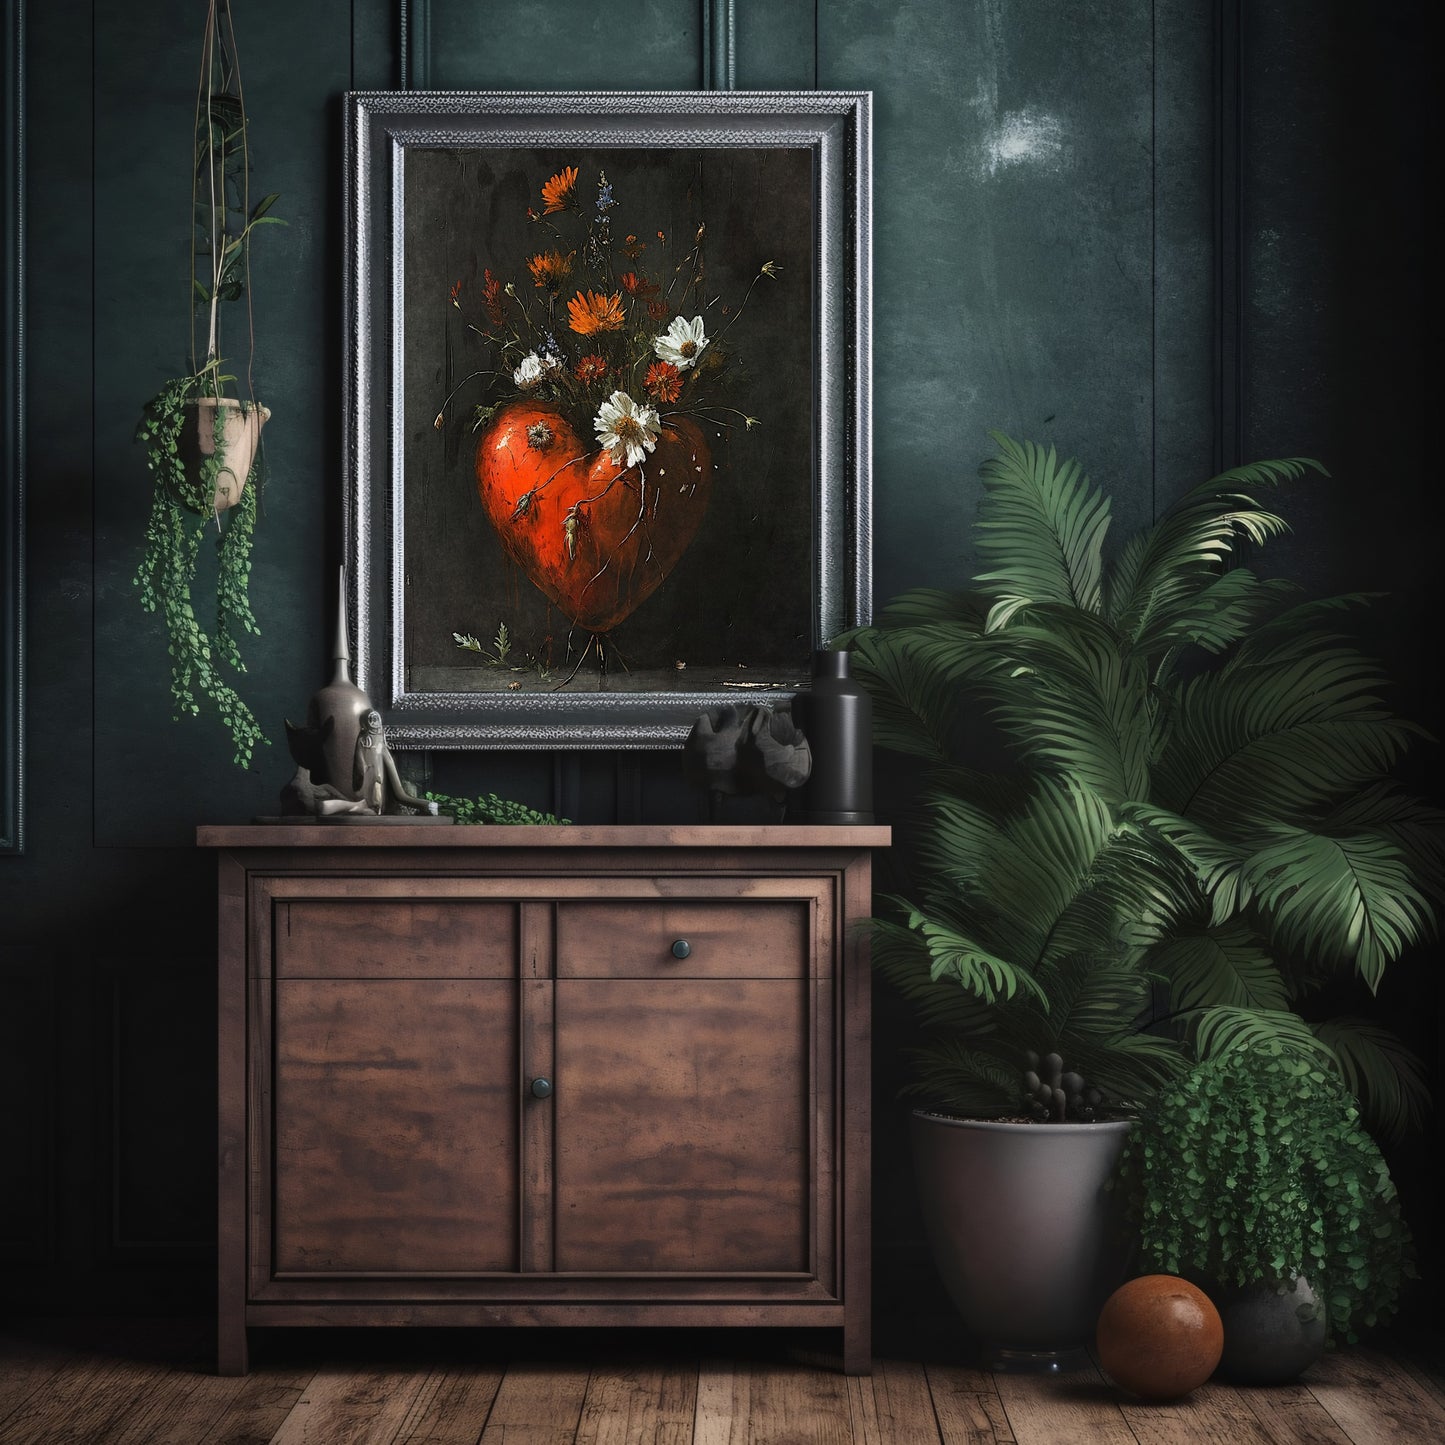 Valentine Wildflowers Wall Art Still Life Oil Painting Heart with Wildflowers Gothic Decor Goblincore Decor Dark Romance Print Paper Poster Print